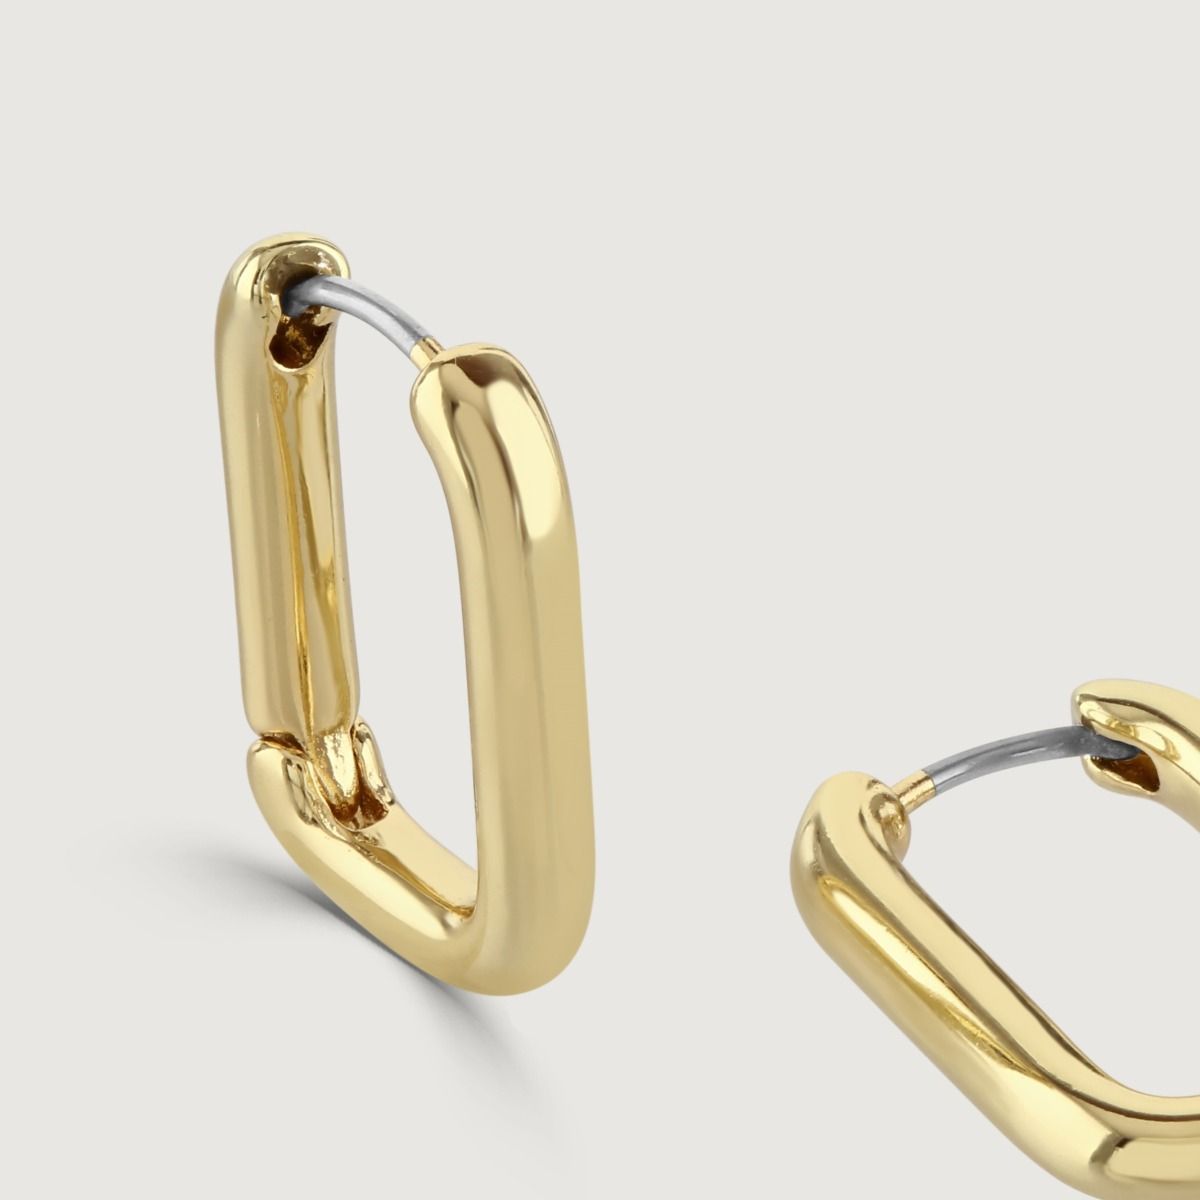 The Rectangle Polished Gold Hoop Earrings are a contemporary and sleek piece. With their polished gold finish and rectangular shape, these hoop earrings exude a modern and sophisticated style. The geometric design adds an element of interest. 